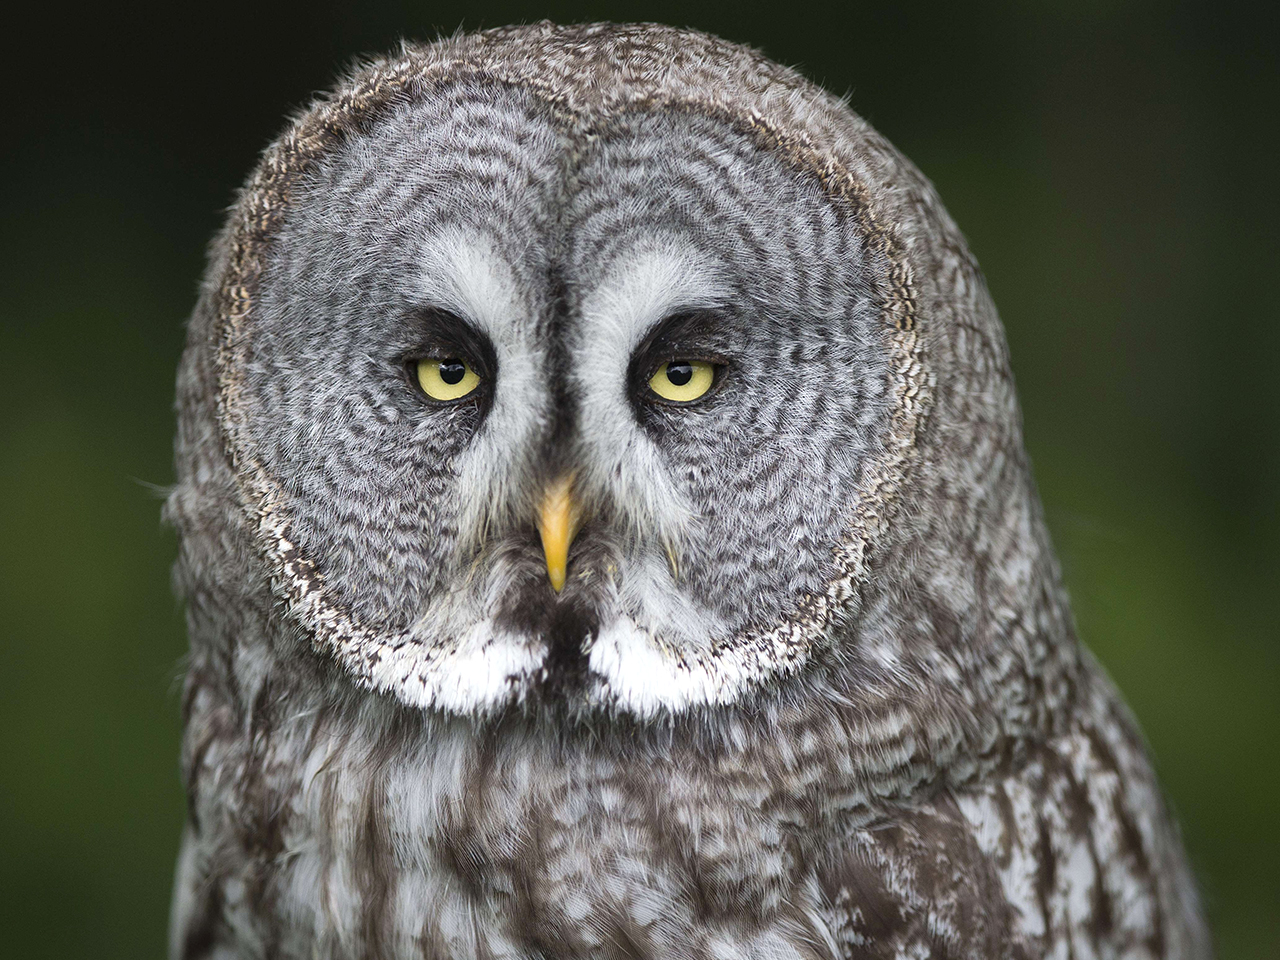 A very unimpressed owl and 23 more of the best animal photos of the week